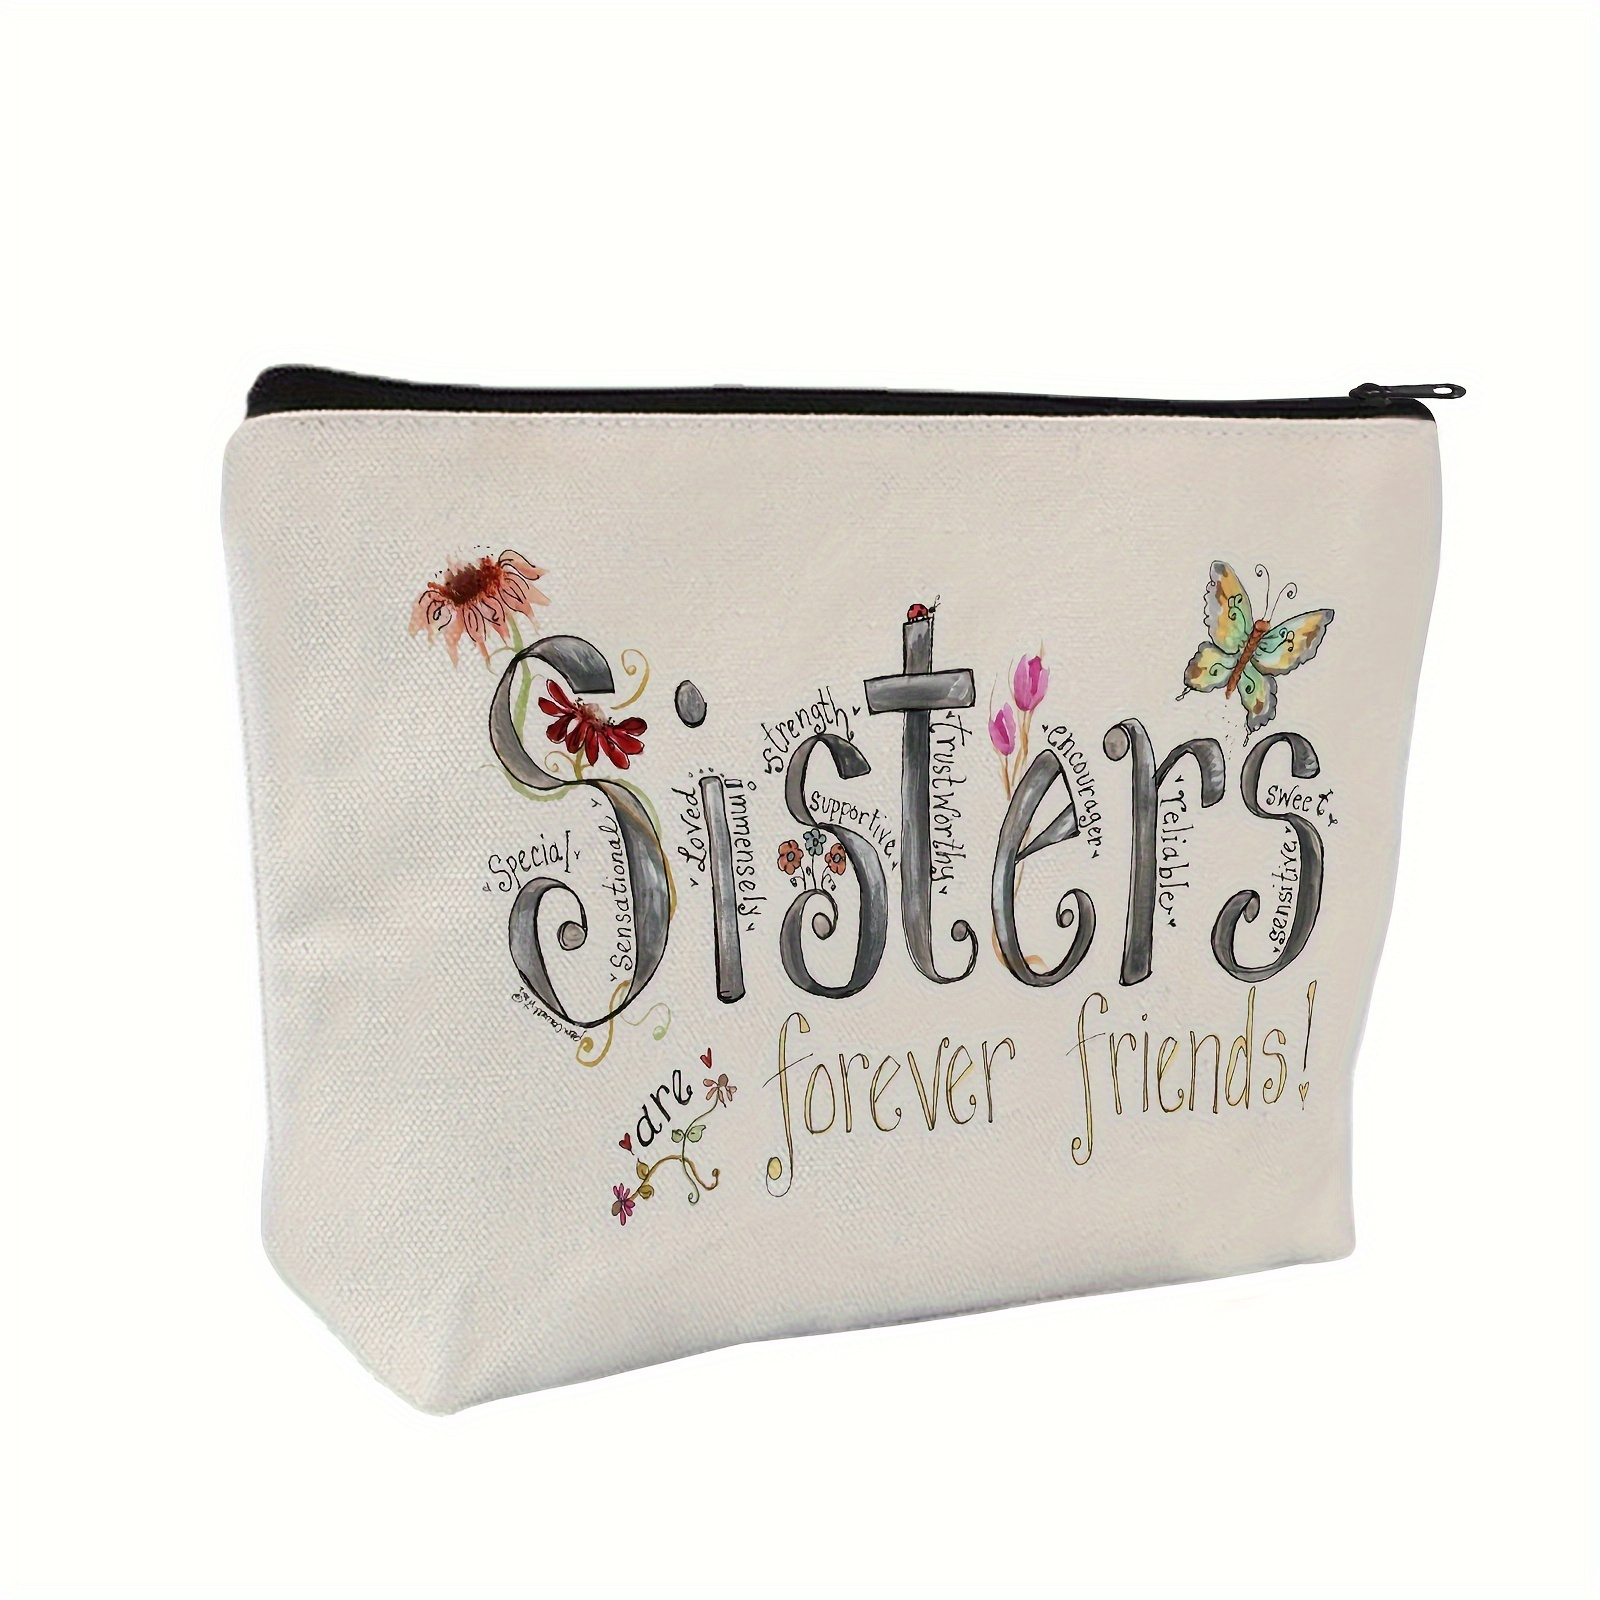 

1pc Sisters Are Forever Friends Makeup Bag - Unisex Cosmetic & Travel Bag - Chic, Secure Zip, Paraben-free Organizer